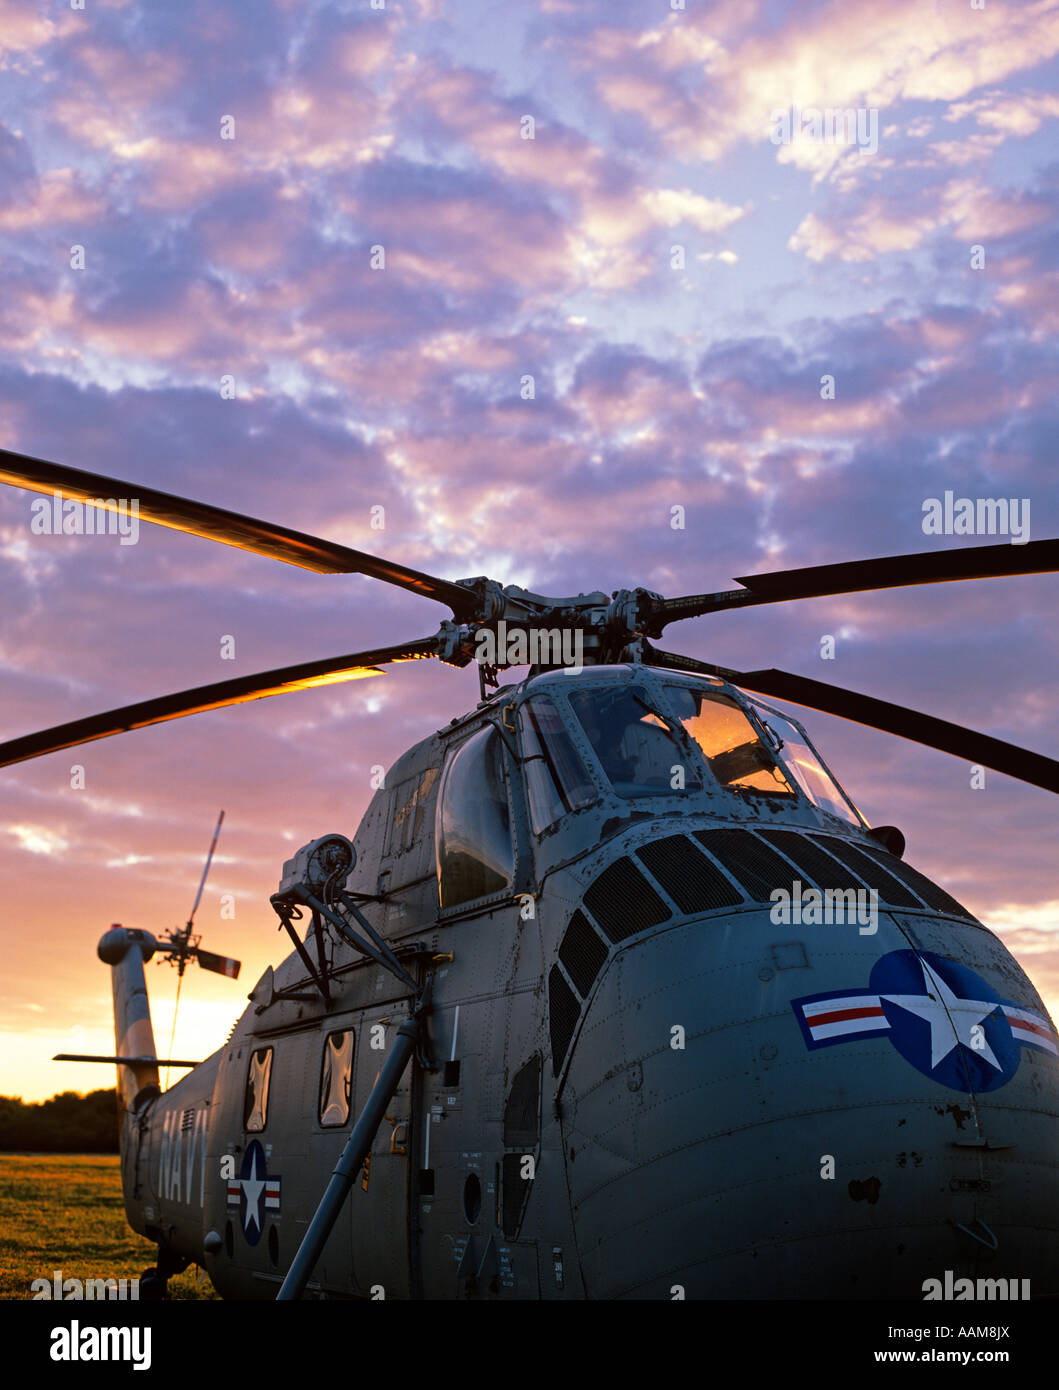 CLOSE-UP U.S.NAVY HELICOPTER 1950s KOREAN WAR BLADES ROTORS SPECIAL SUNSET LIGHTING MOODY AIRCRAFT STAR Stock Photo